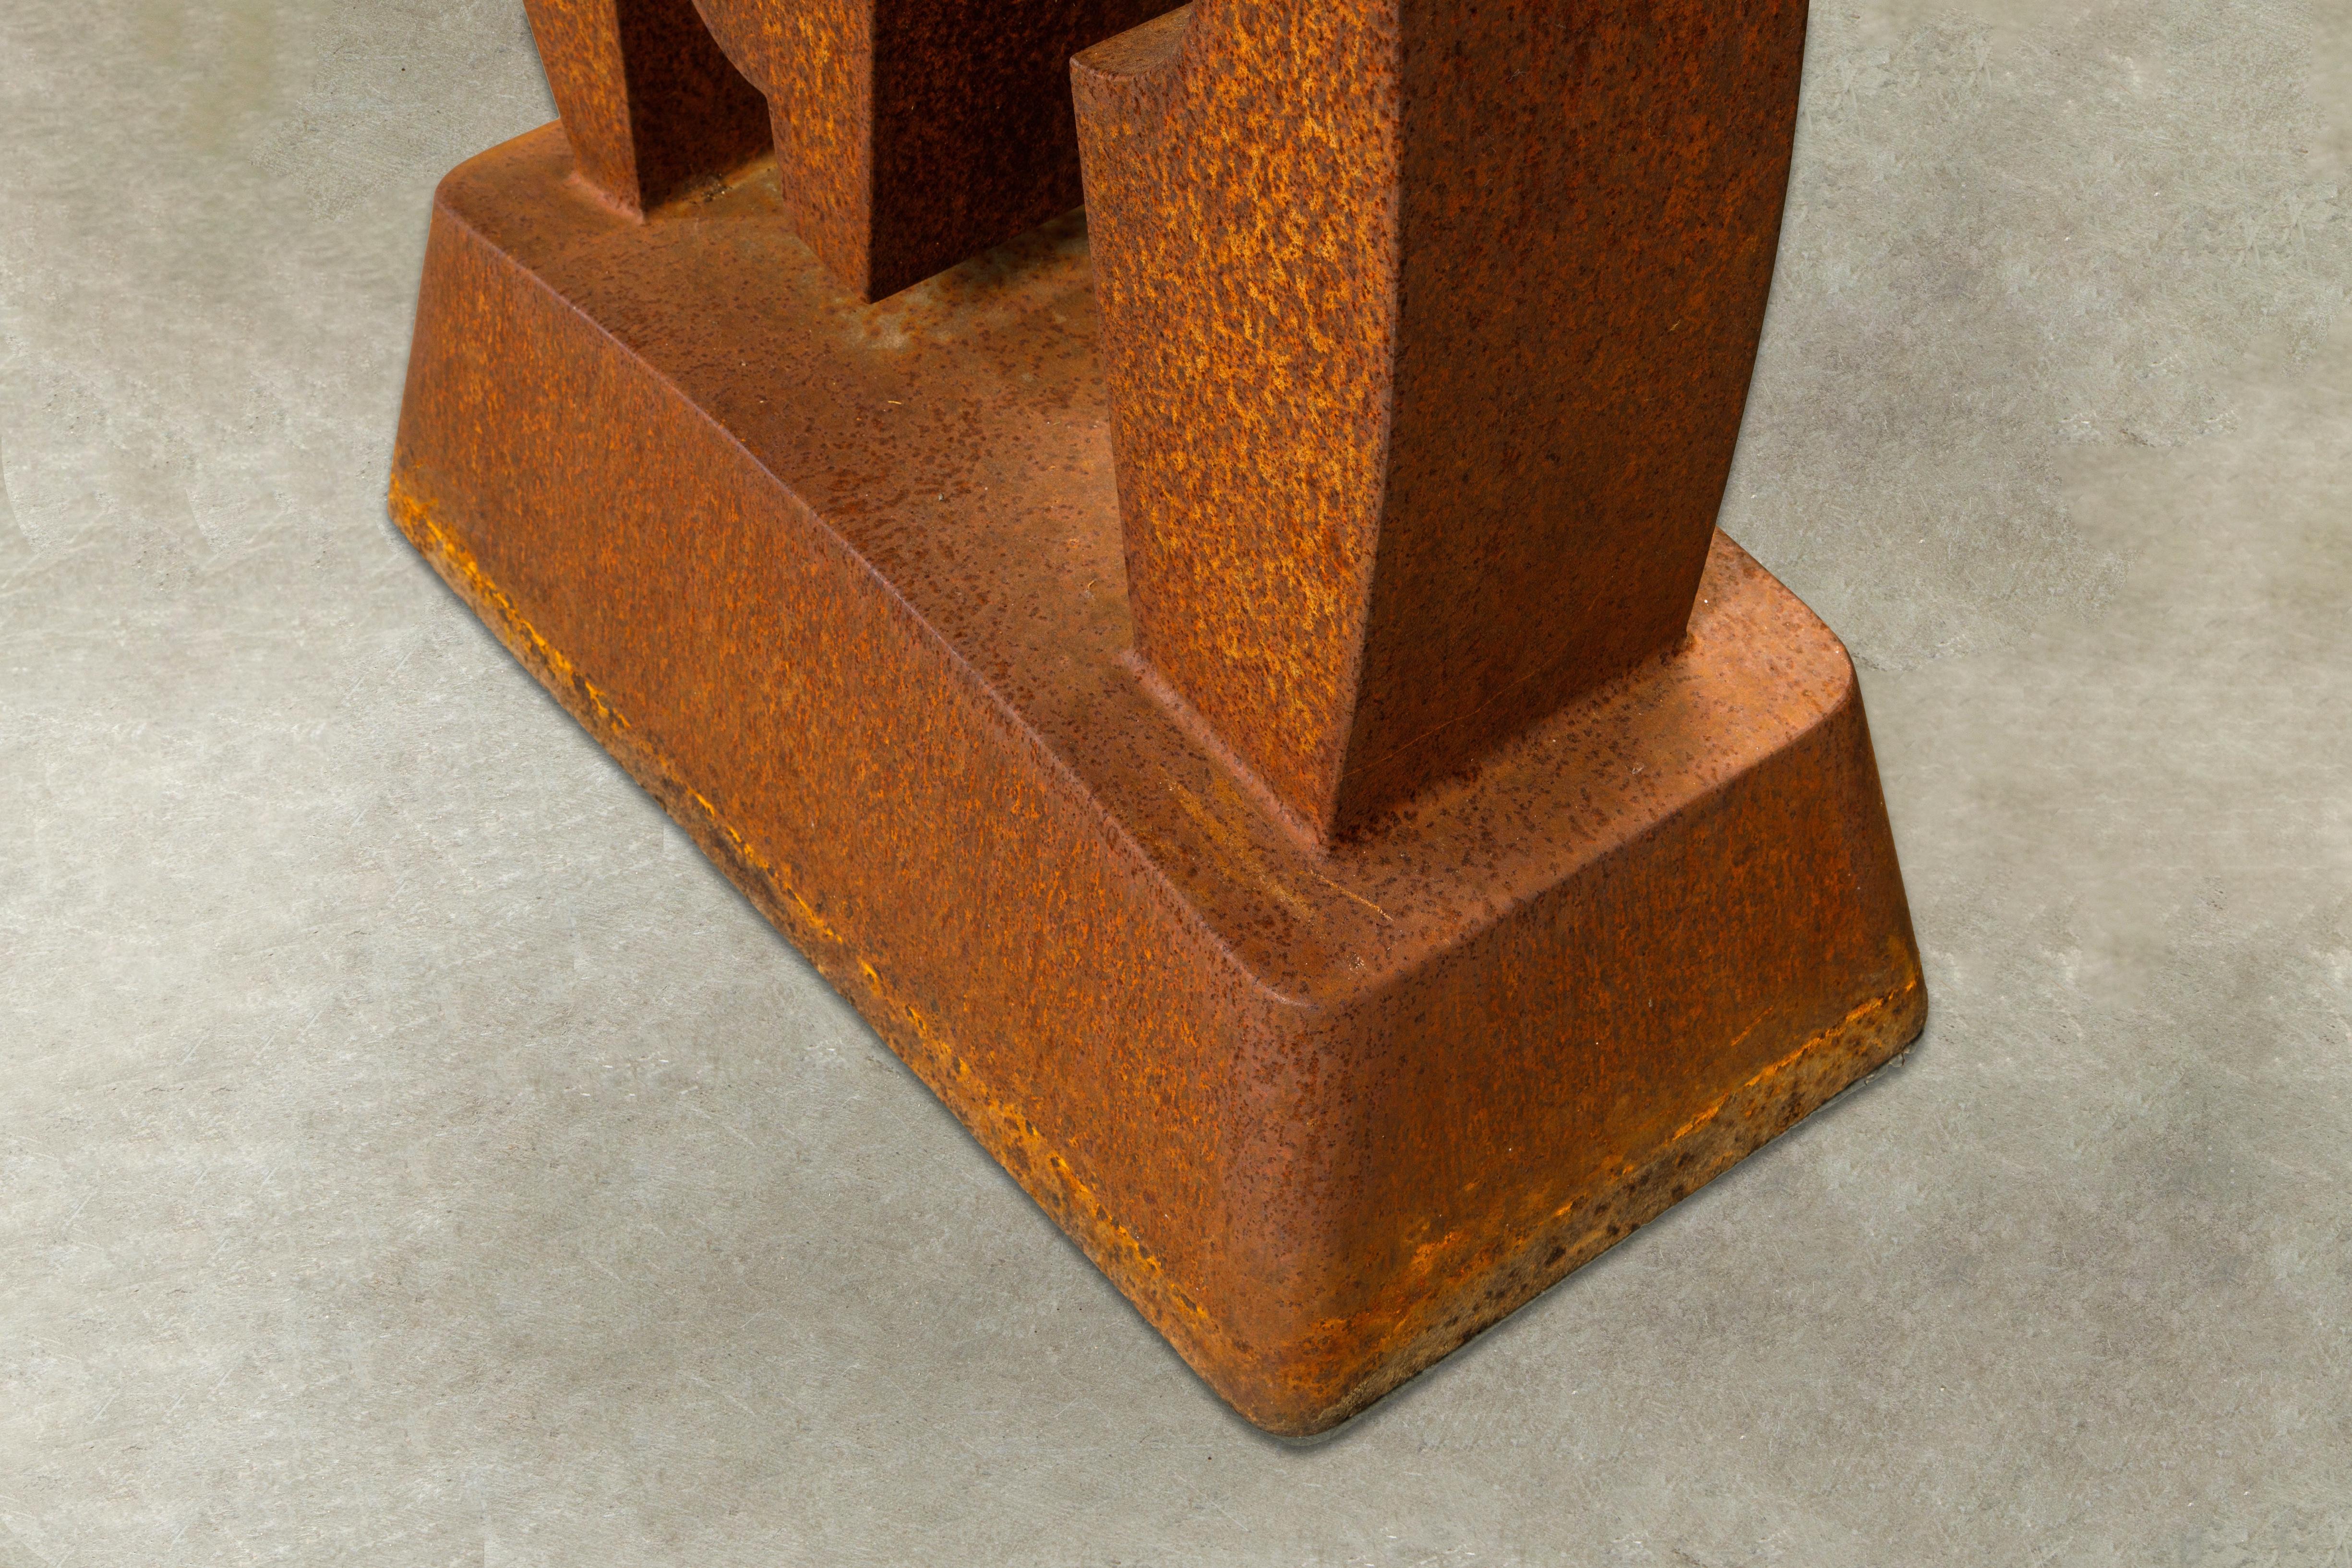 Patinated Steel Sculpture by Arnie Garborg, Signed and Dated 1997 5